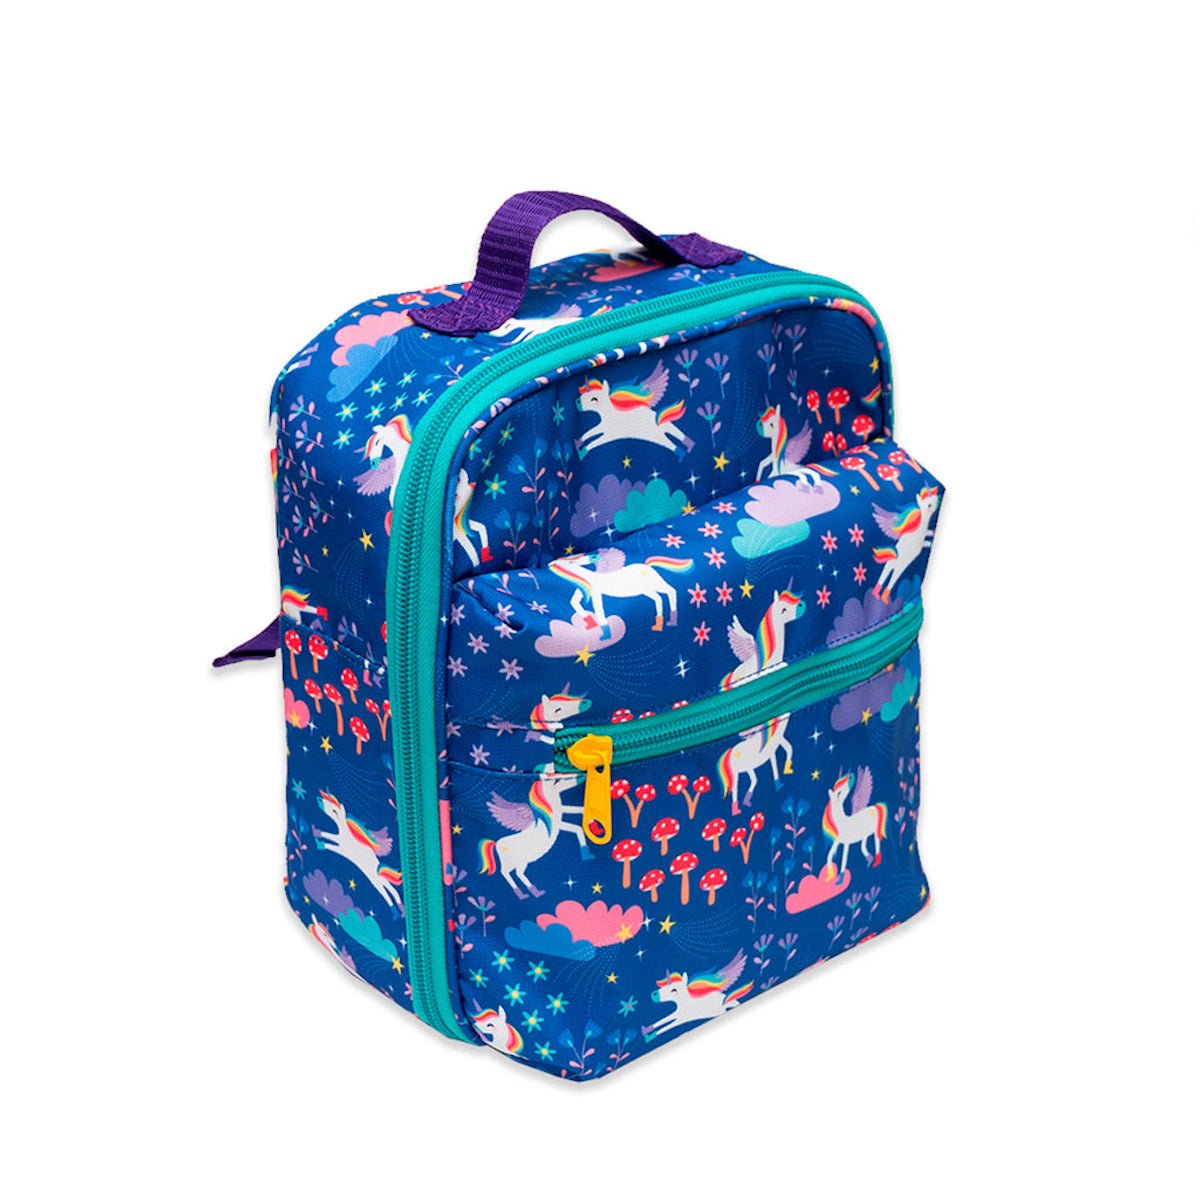 Kids' Character Lunch Box - EVAMAIA